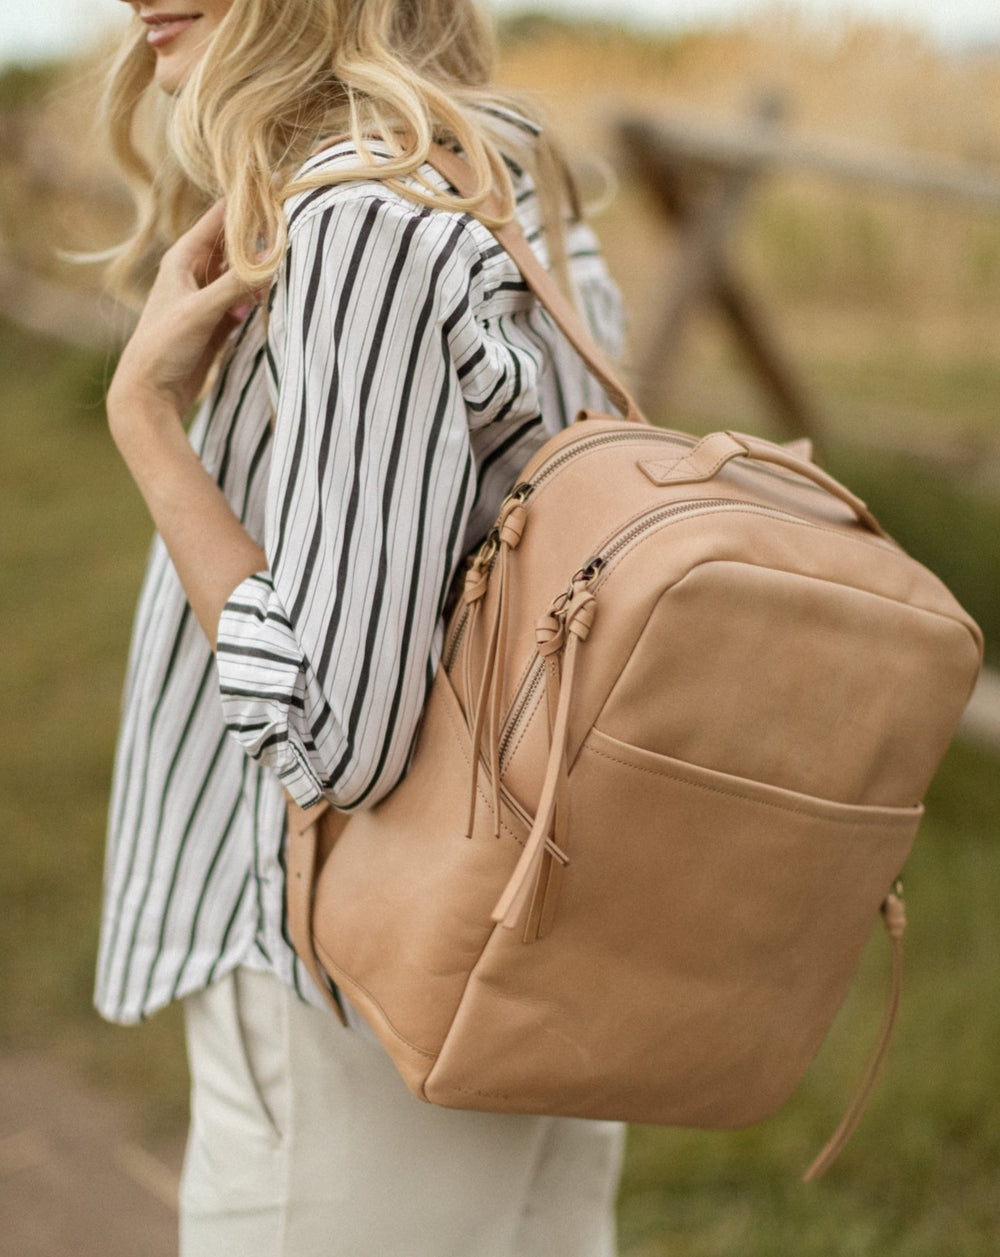 Daisy Leather Backpack | Concealed Carry Purses for Women Cognac